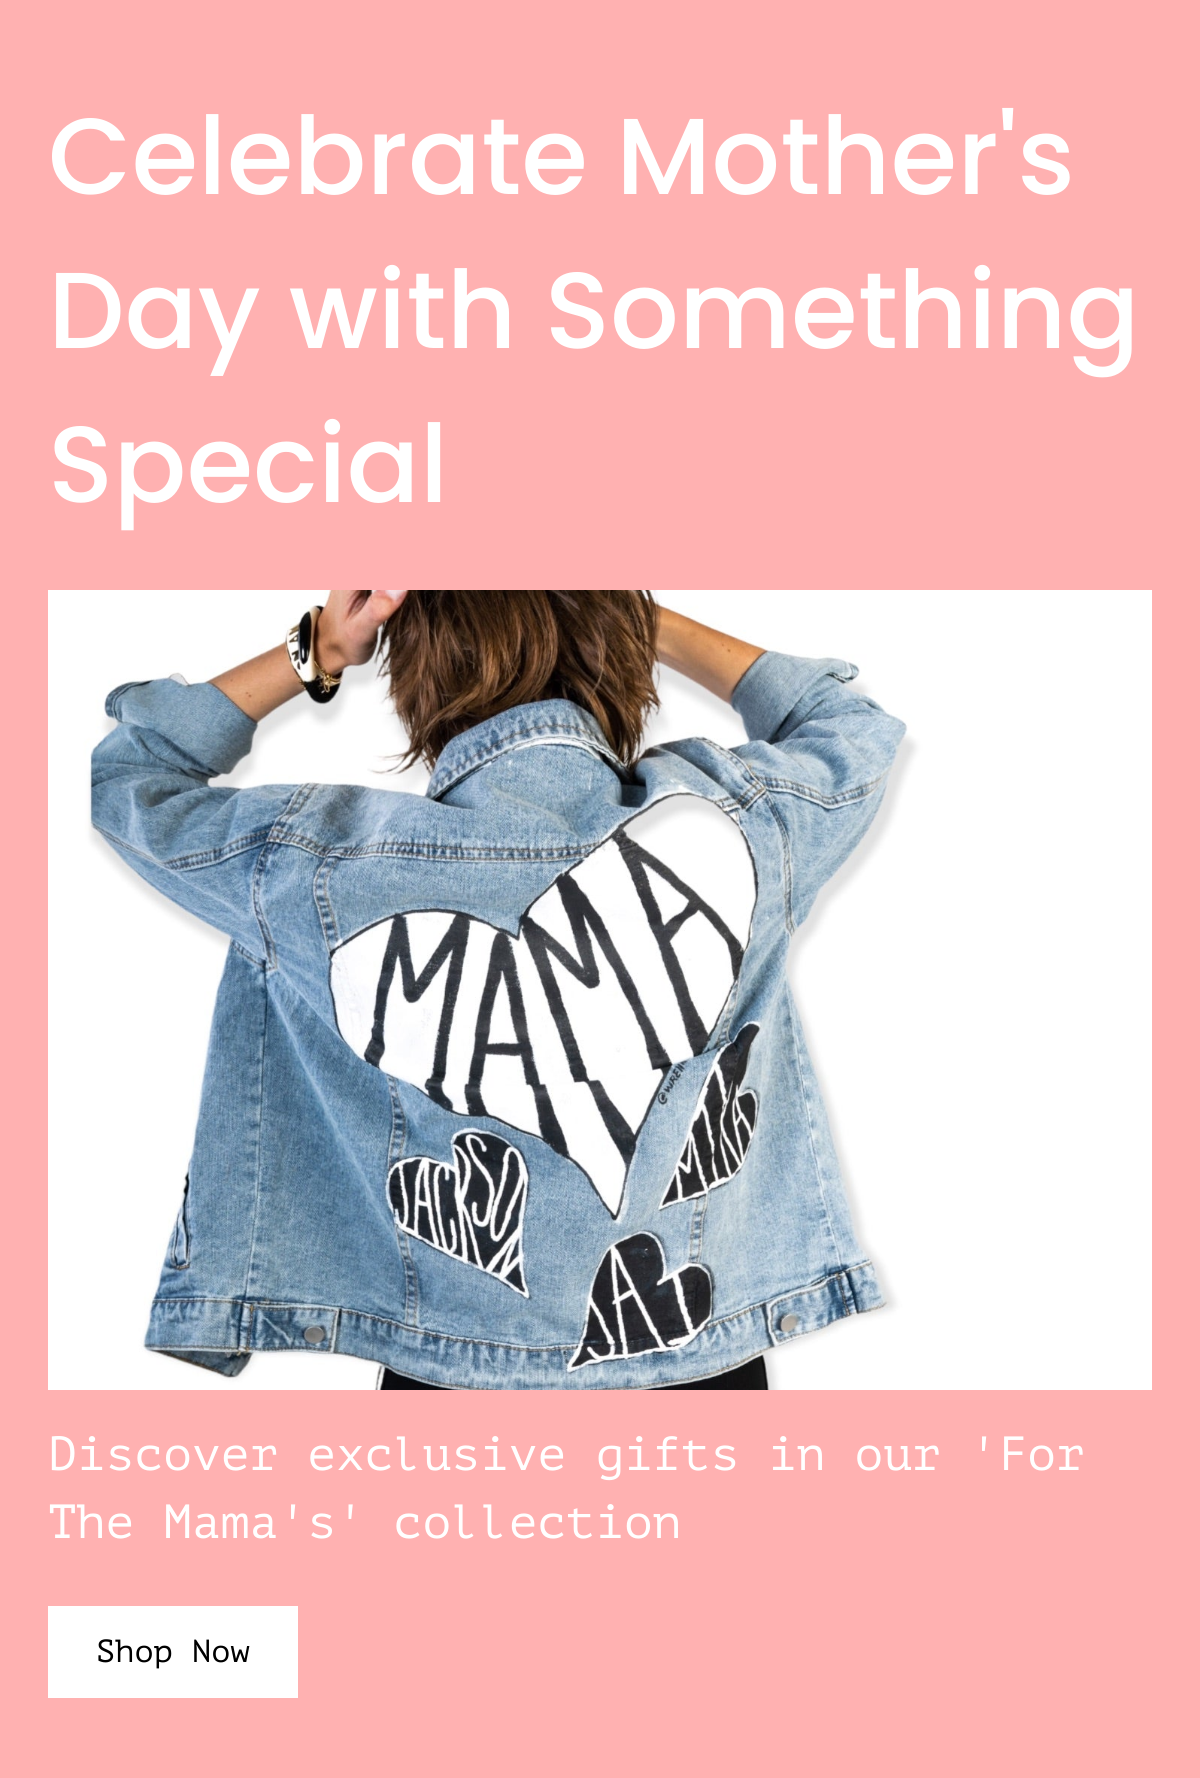  Celebrate Mother's Day with Something Special Discover exclusive gifts in our 'For The Mama's' collection Shop Now